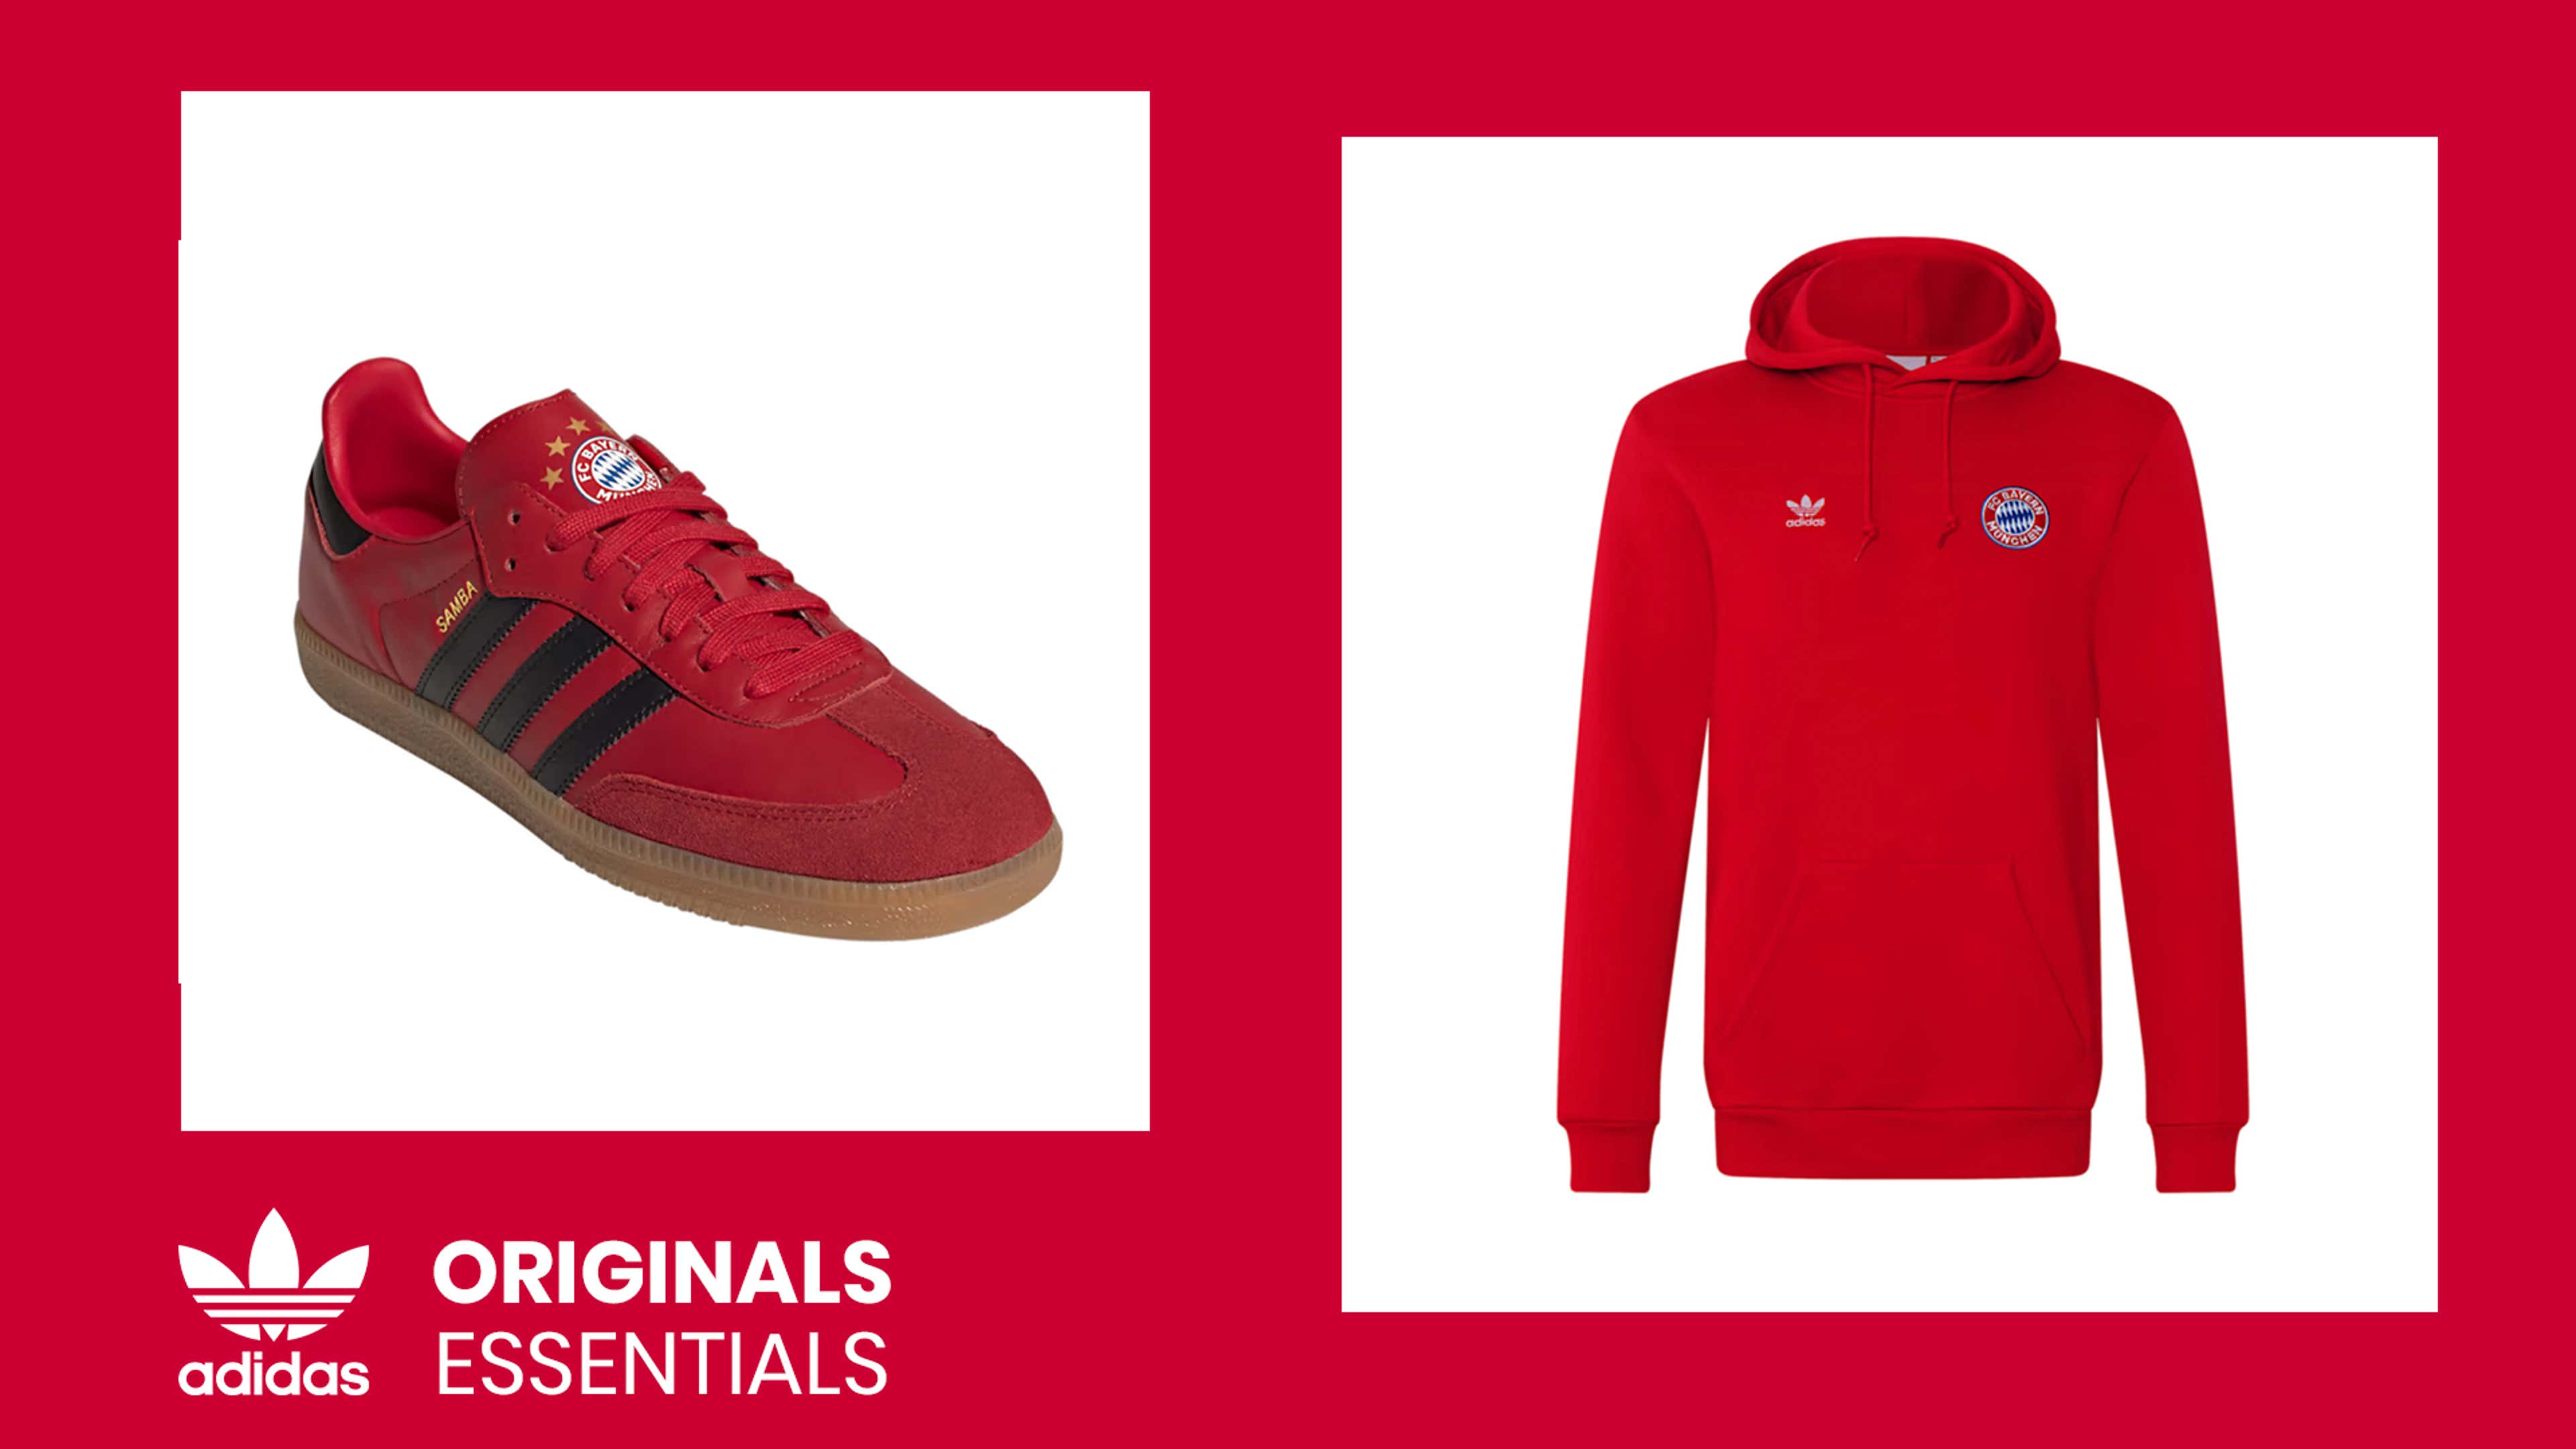 adidas launch sleek Originals Essentials collections for Arsenal, Man  United, Real Madrid and more